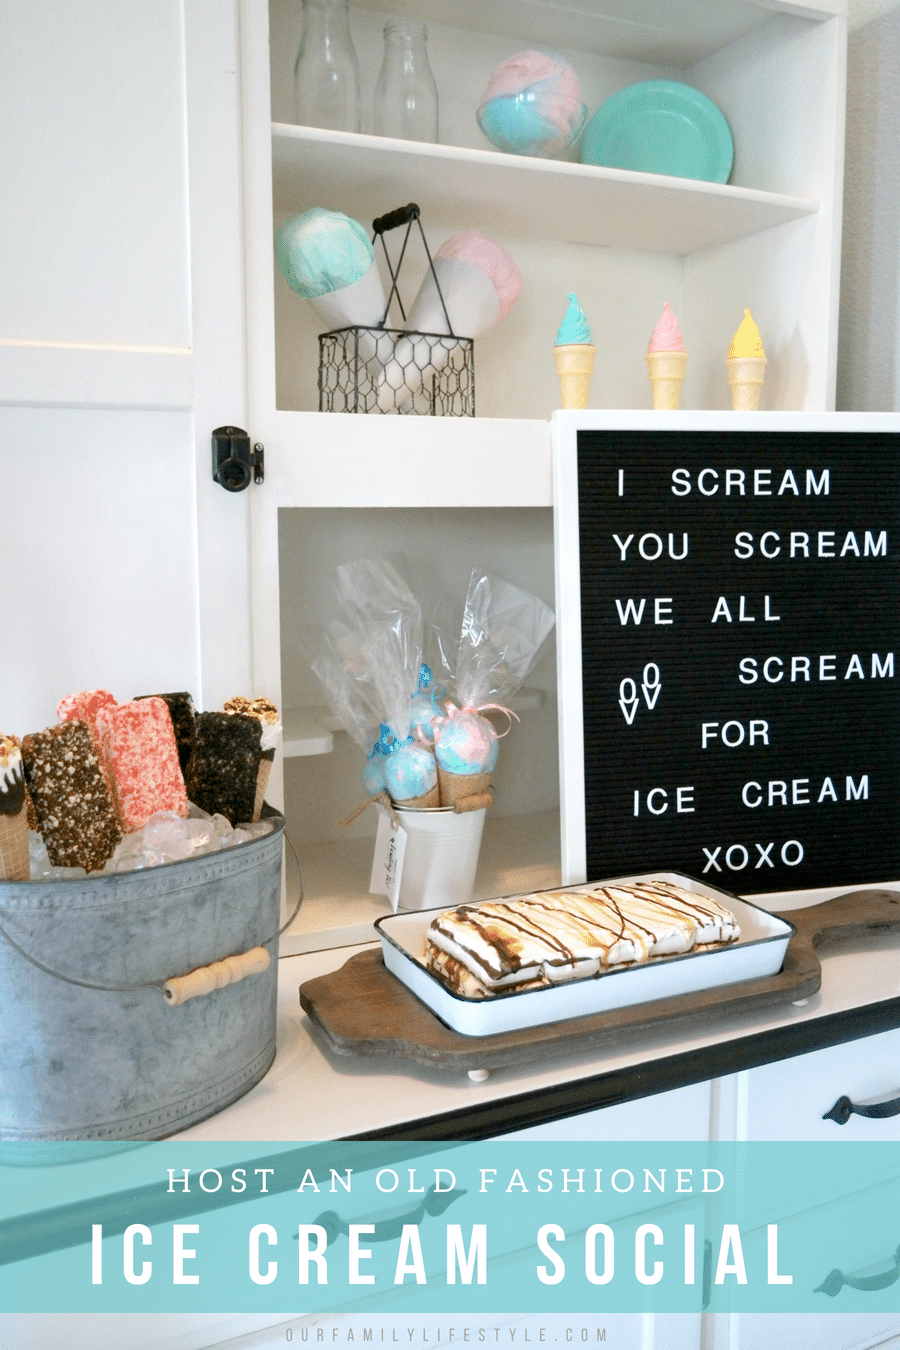 Host an Old Fashioned Ice Cream Social with Good Humor